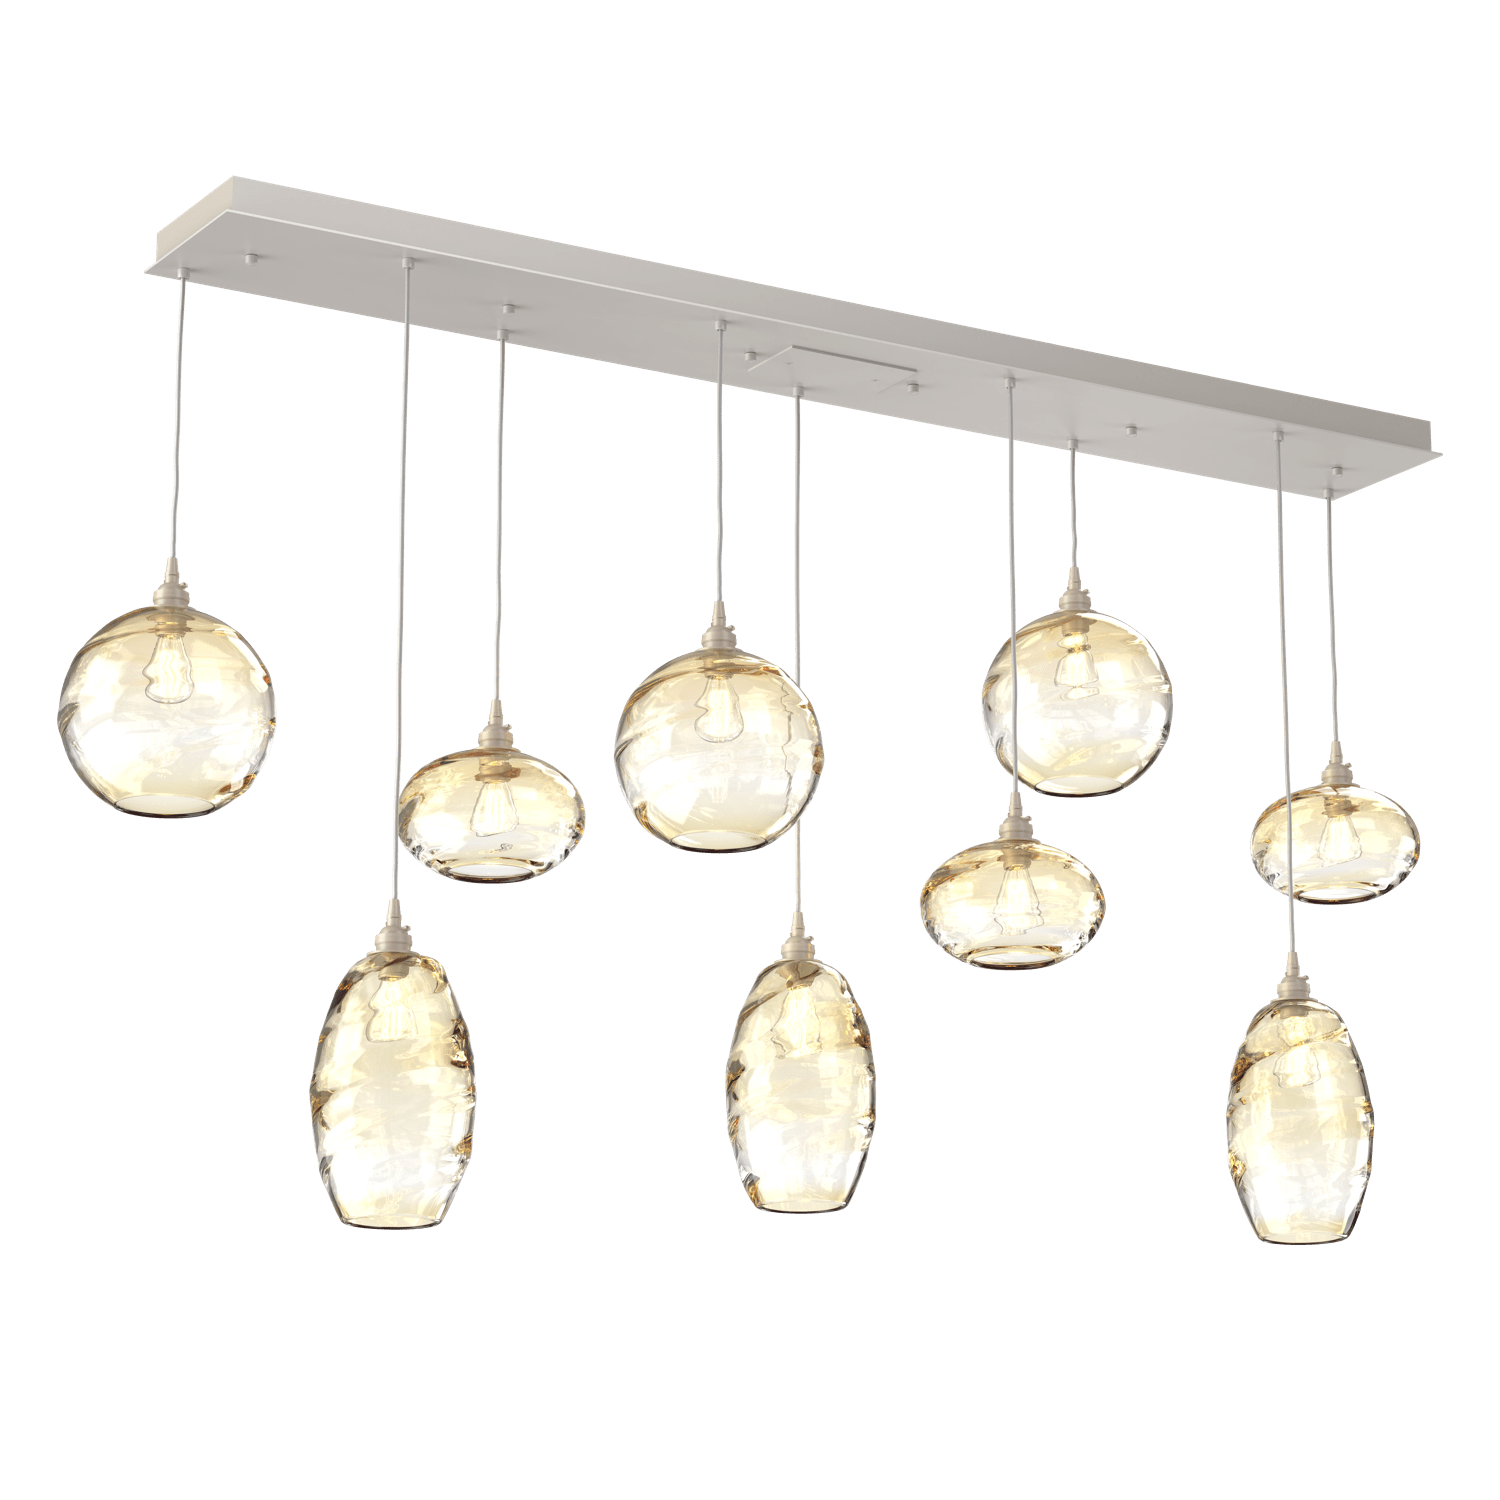 PLB0048-09-BS-OA-Hammerton-Studio-Optic-Blown-Glass-Misto-9-light-linear-pendant-chandelier-with-metallic-beige-silver-finish-and-optic-amber-blown-glass-shades-and-incandescent-lamping